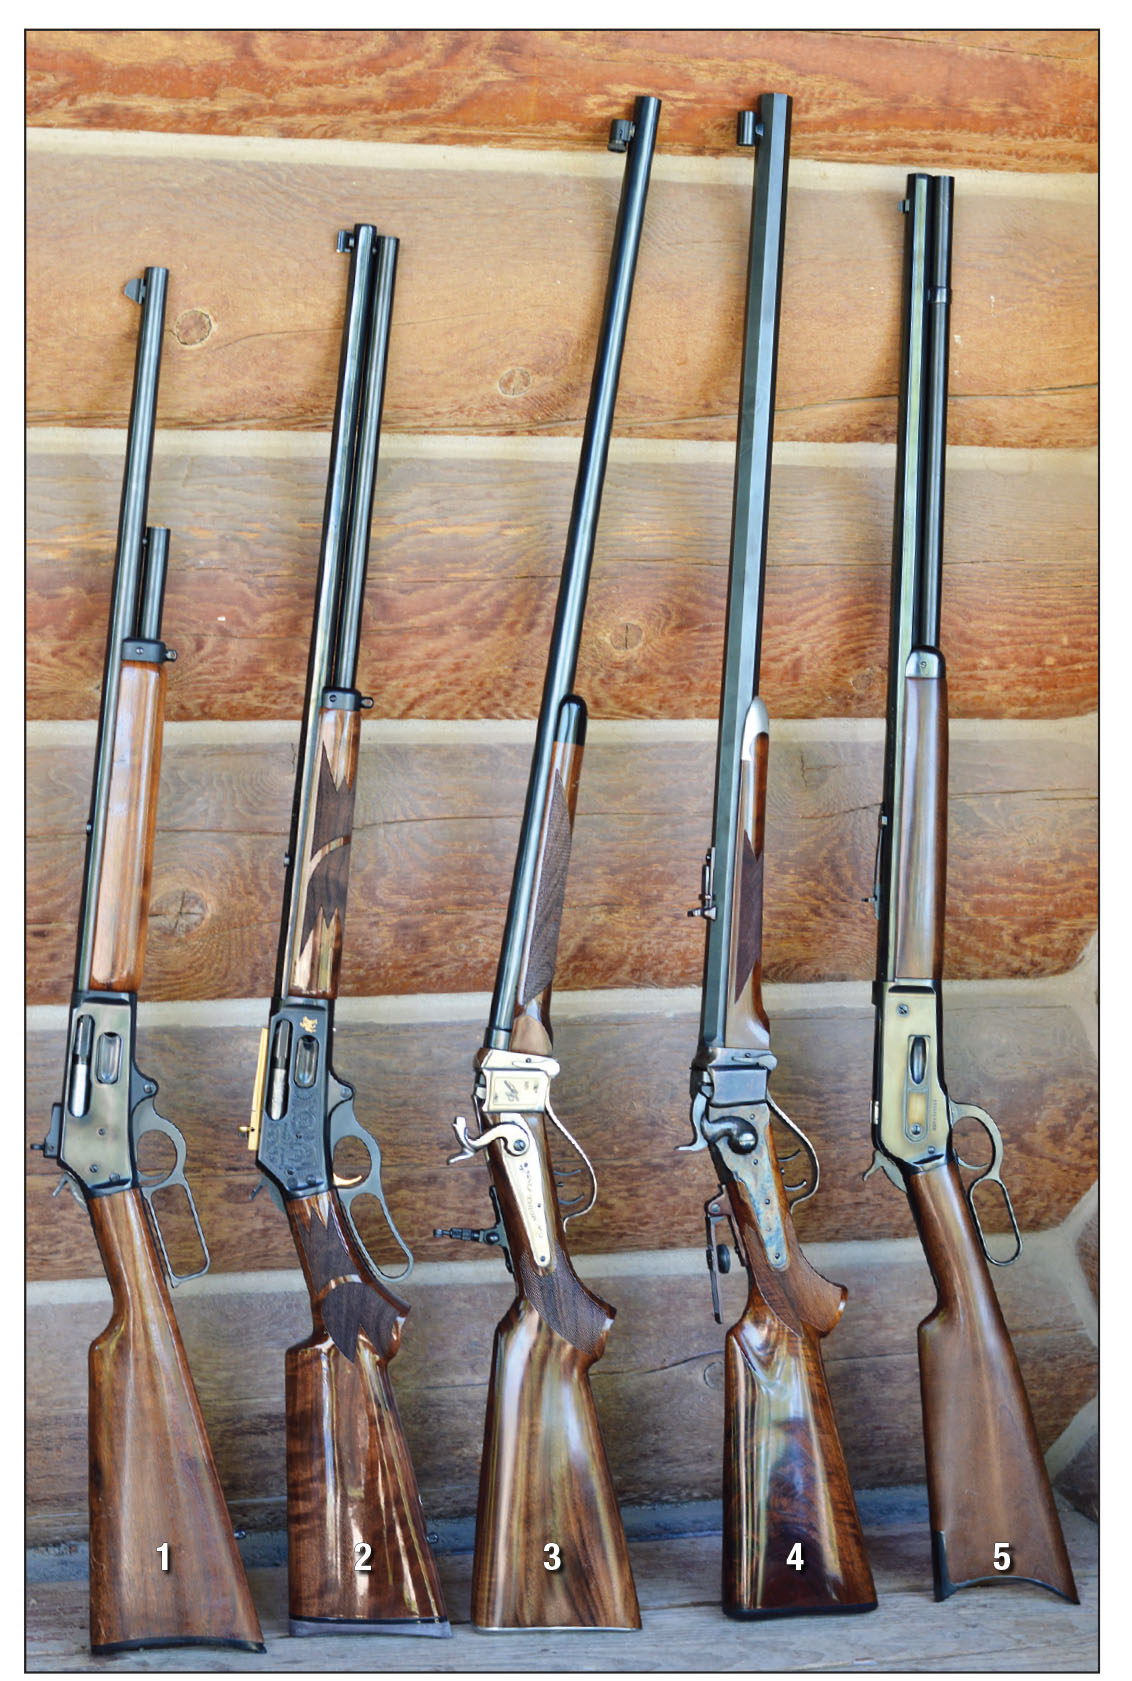 The .45-70 has found great favor among hunters, target shooters and cowboy action competitors. Examples include a (1) Marlin Model 1895 (1972 vintage), (2) Marlin Model 1895LTD Limited Edition, (3) Lyman/Pedersoli Model 1878 Sharps, (4) Shiloh Sharps Model 1874 and (5) Browning Model 1886 rifle.